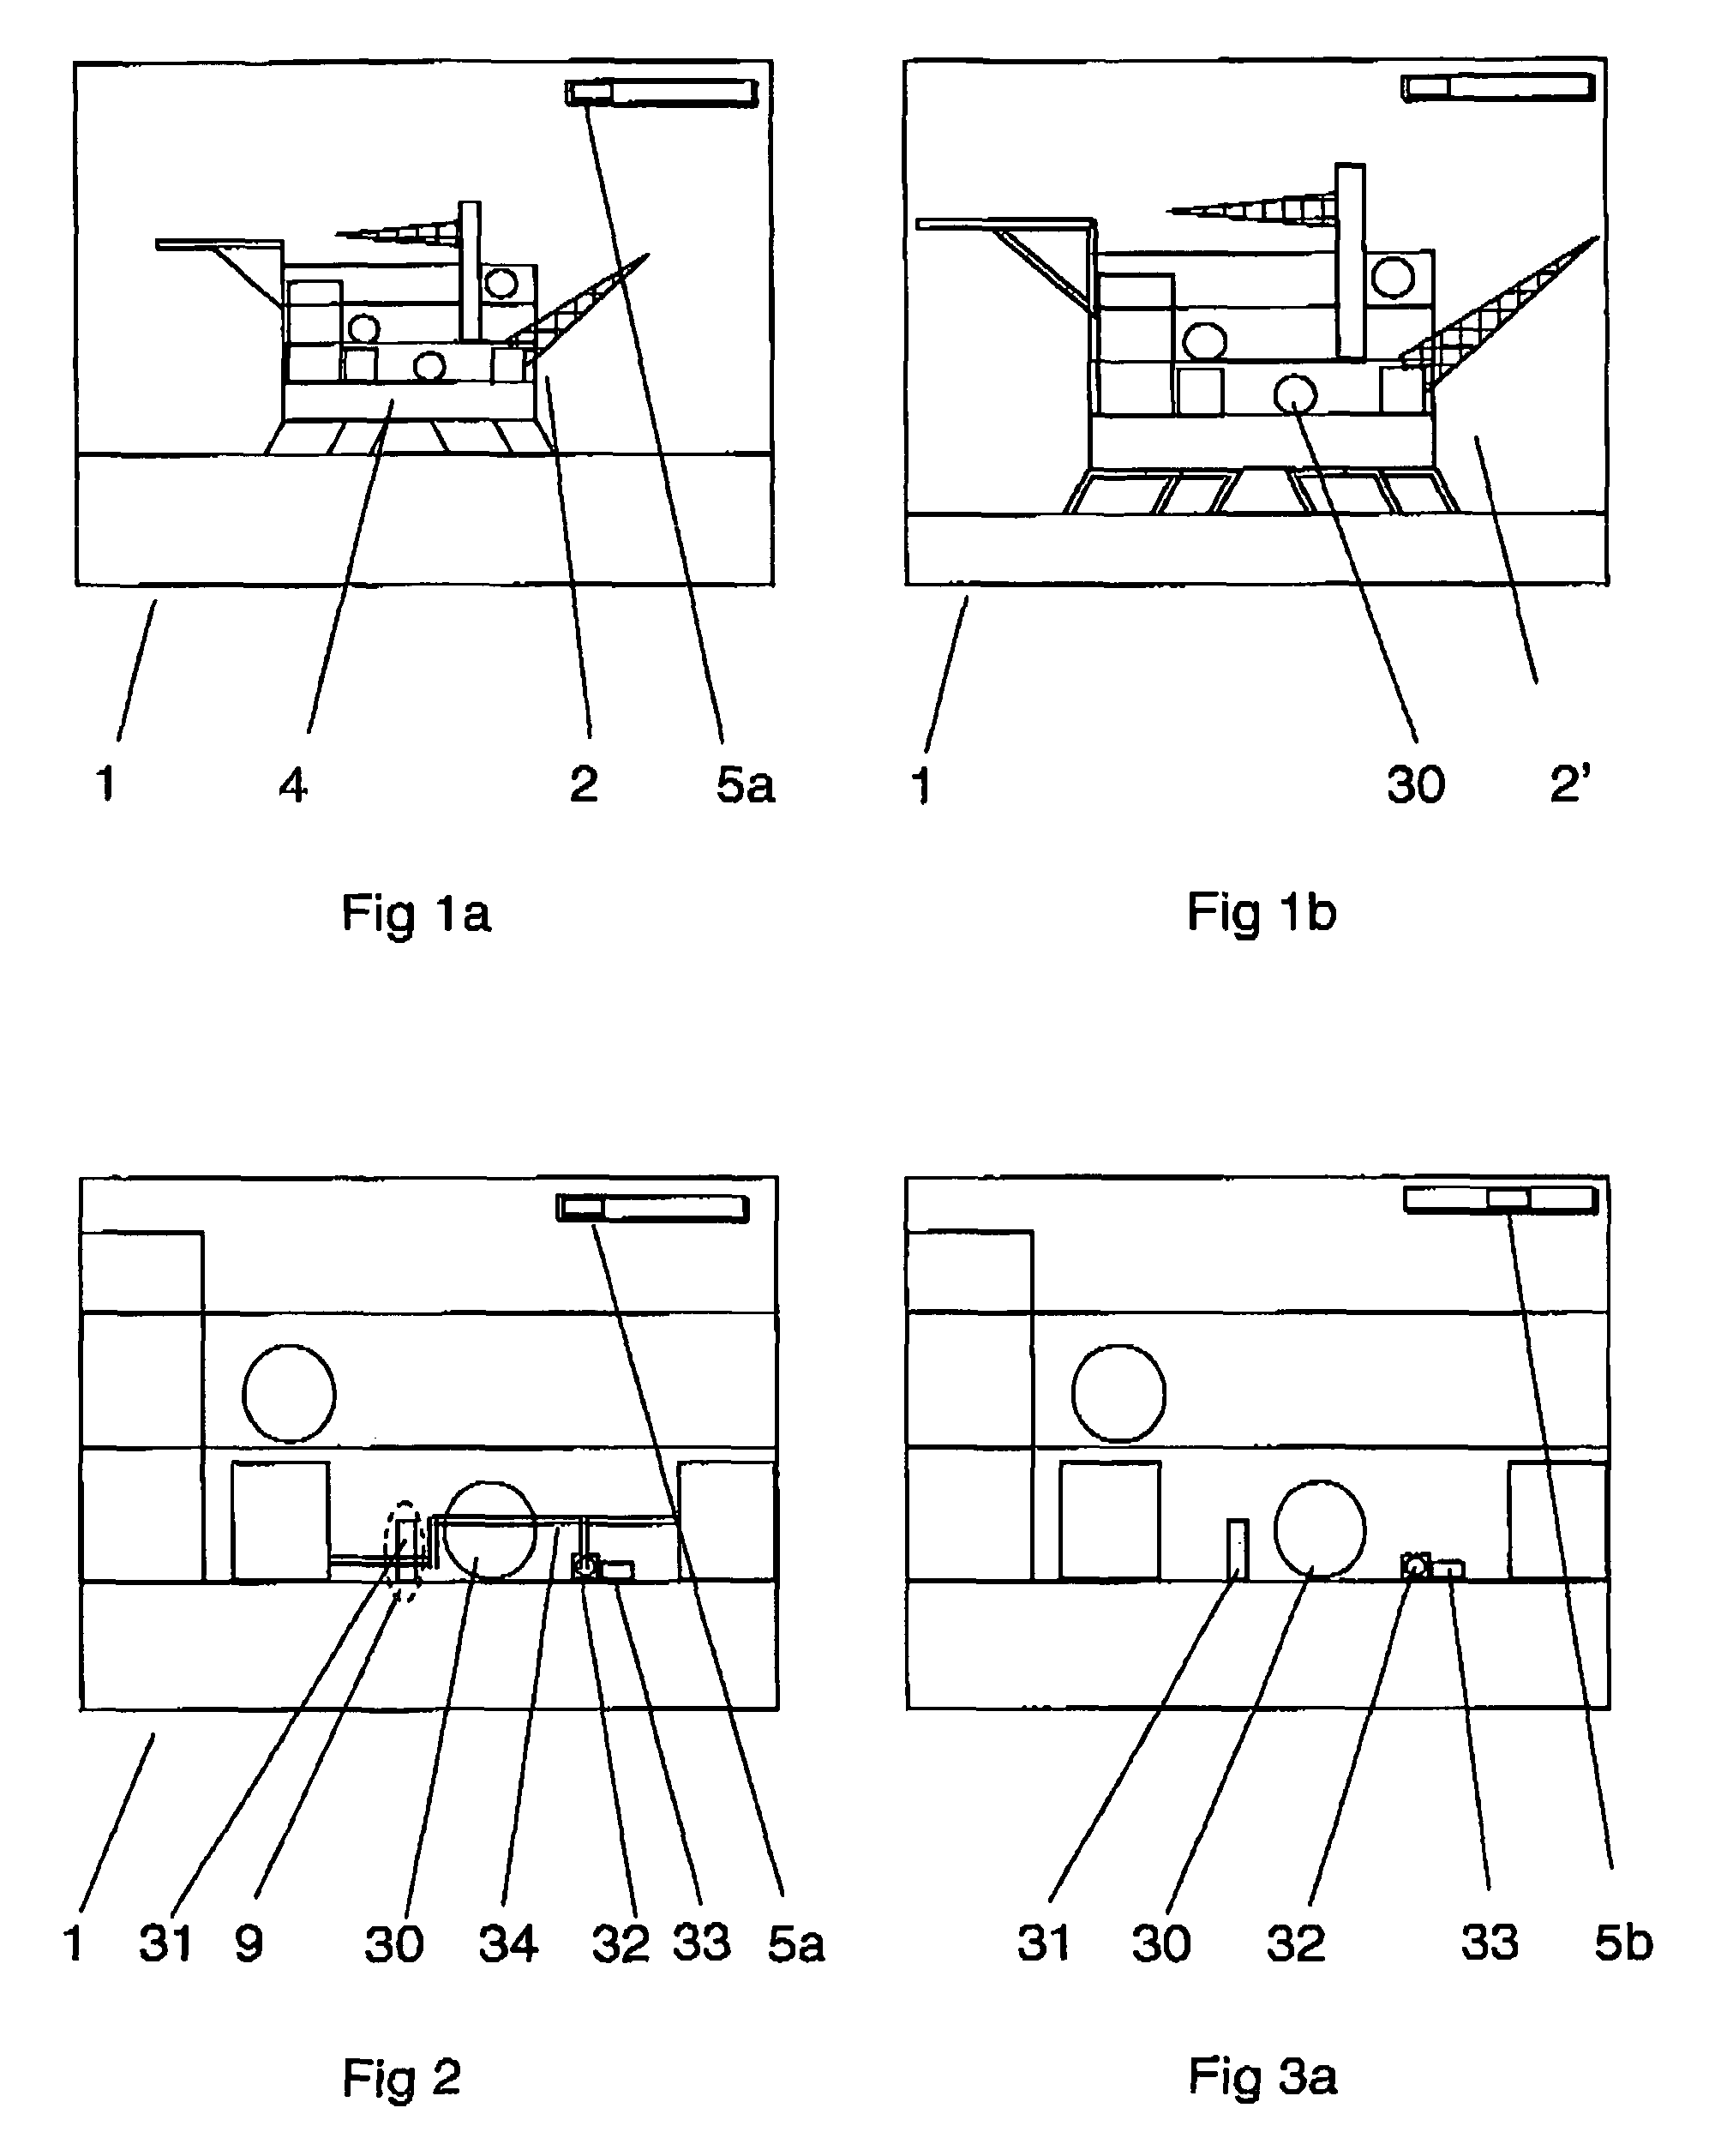 Human-machine interface for a control system